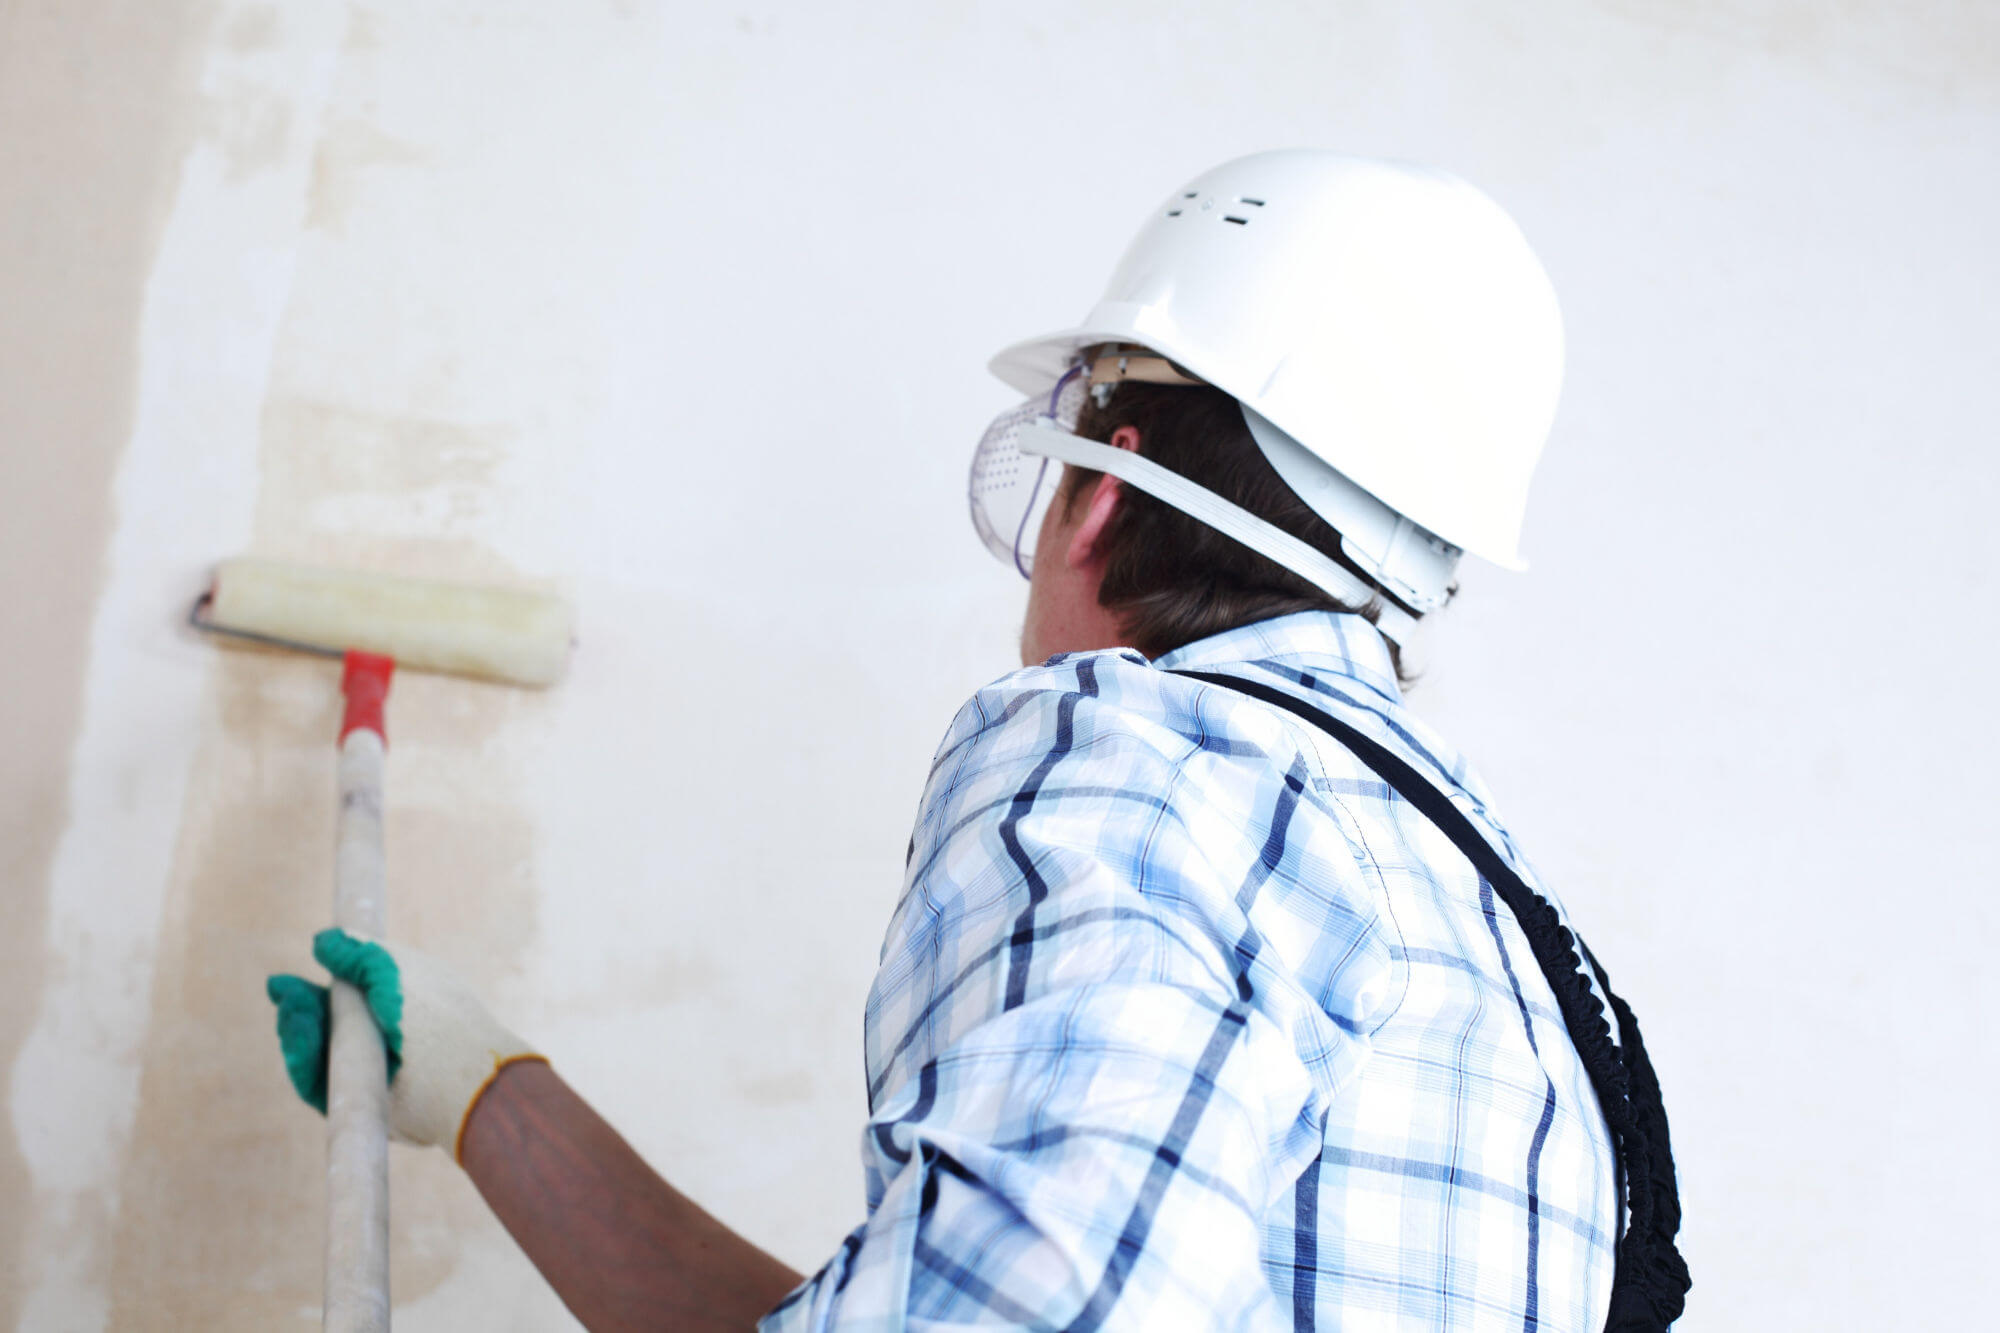 commercial painting increases employee motivation